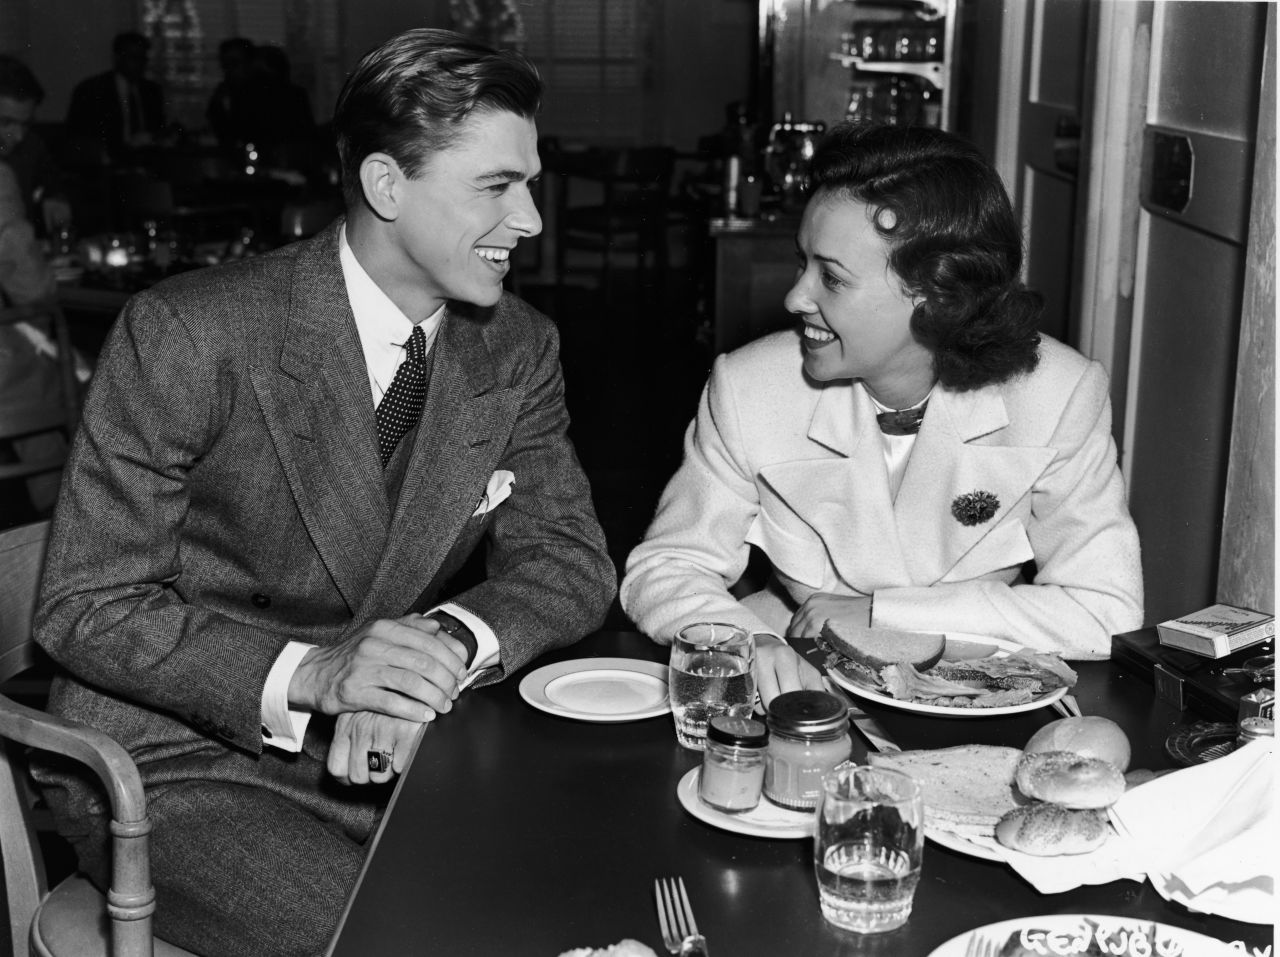 After starting out as a radio sports broadcaster, Reagan worked his way into the acting profession. Here, he sits with actress Margaret Lindsay in the Warner Brothers Studio commissary in 1935.